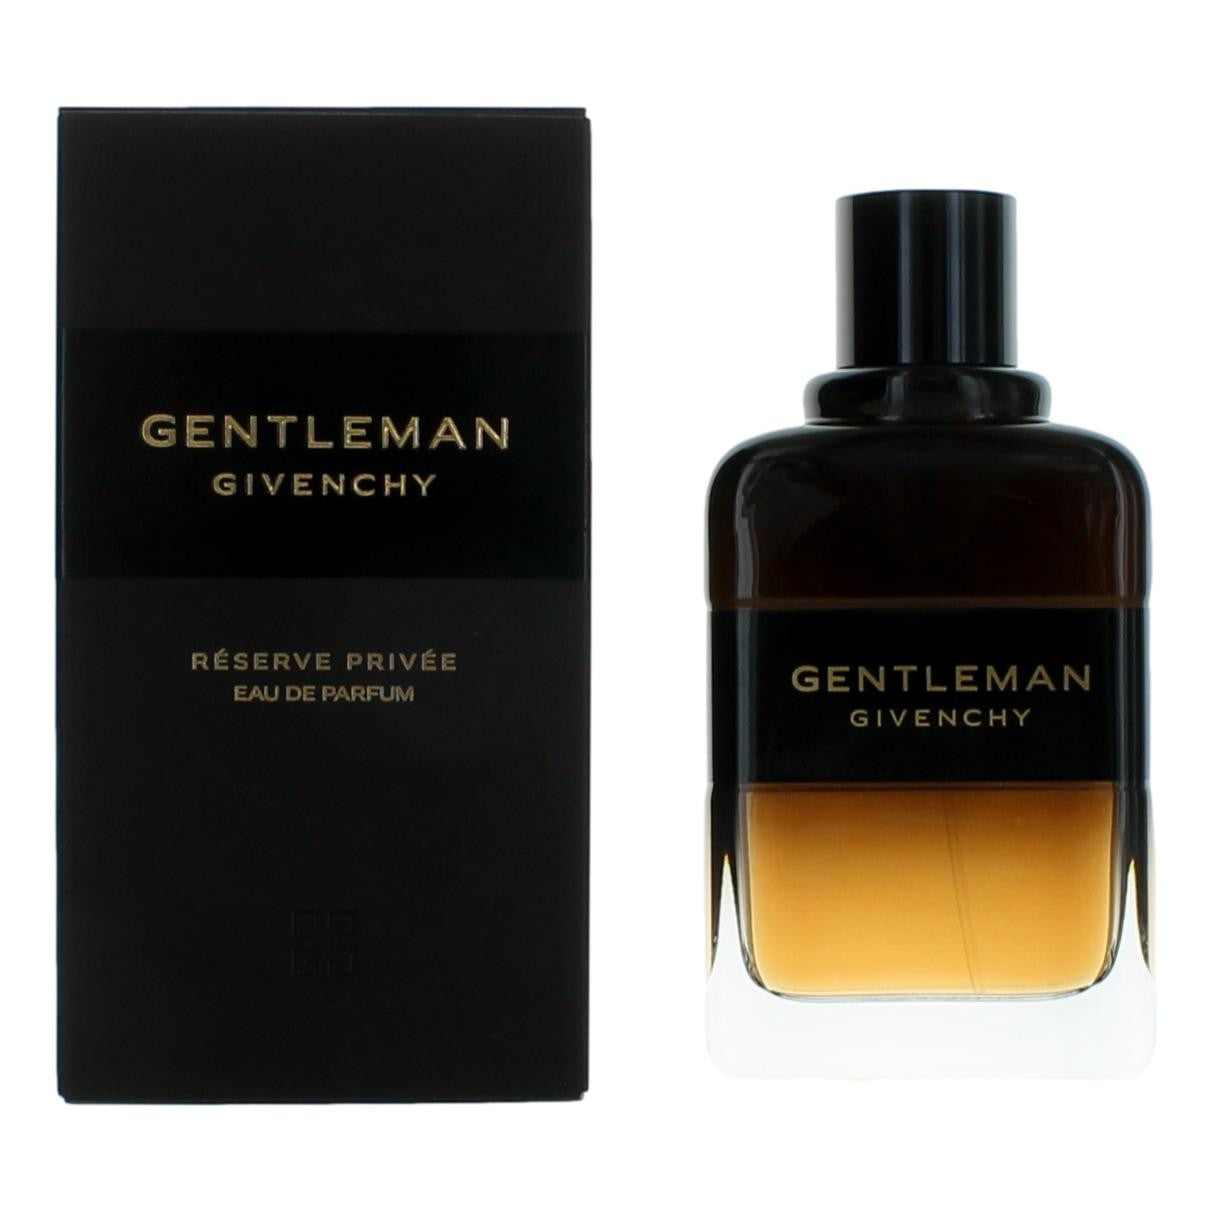 Gentleman Reserve Privee by Givenchy, 3.3 oz EDP Spray for Men